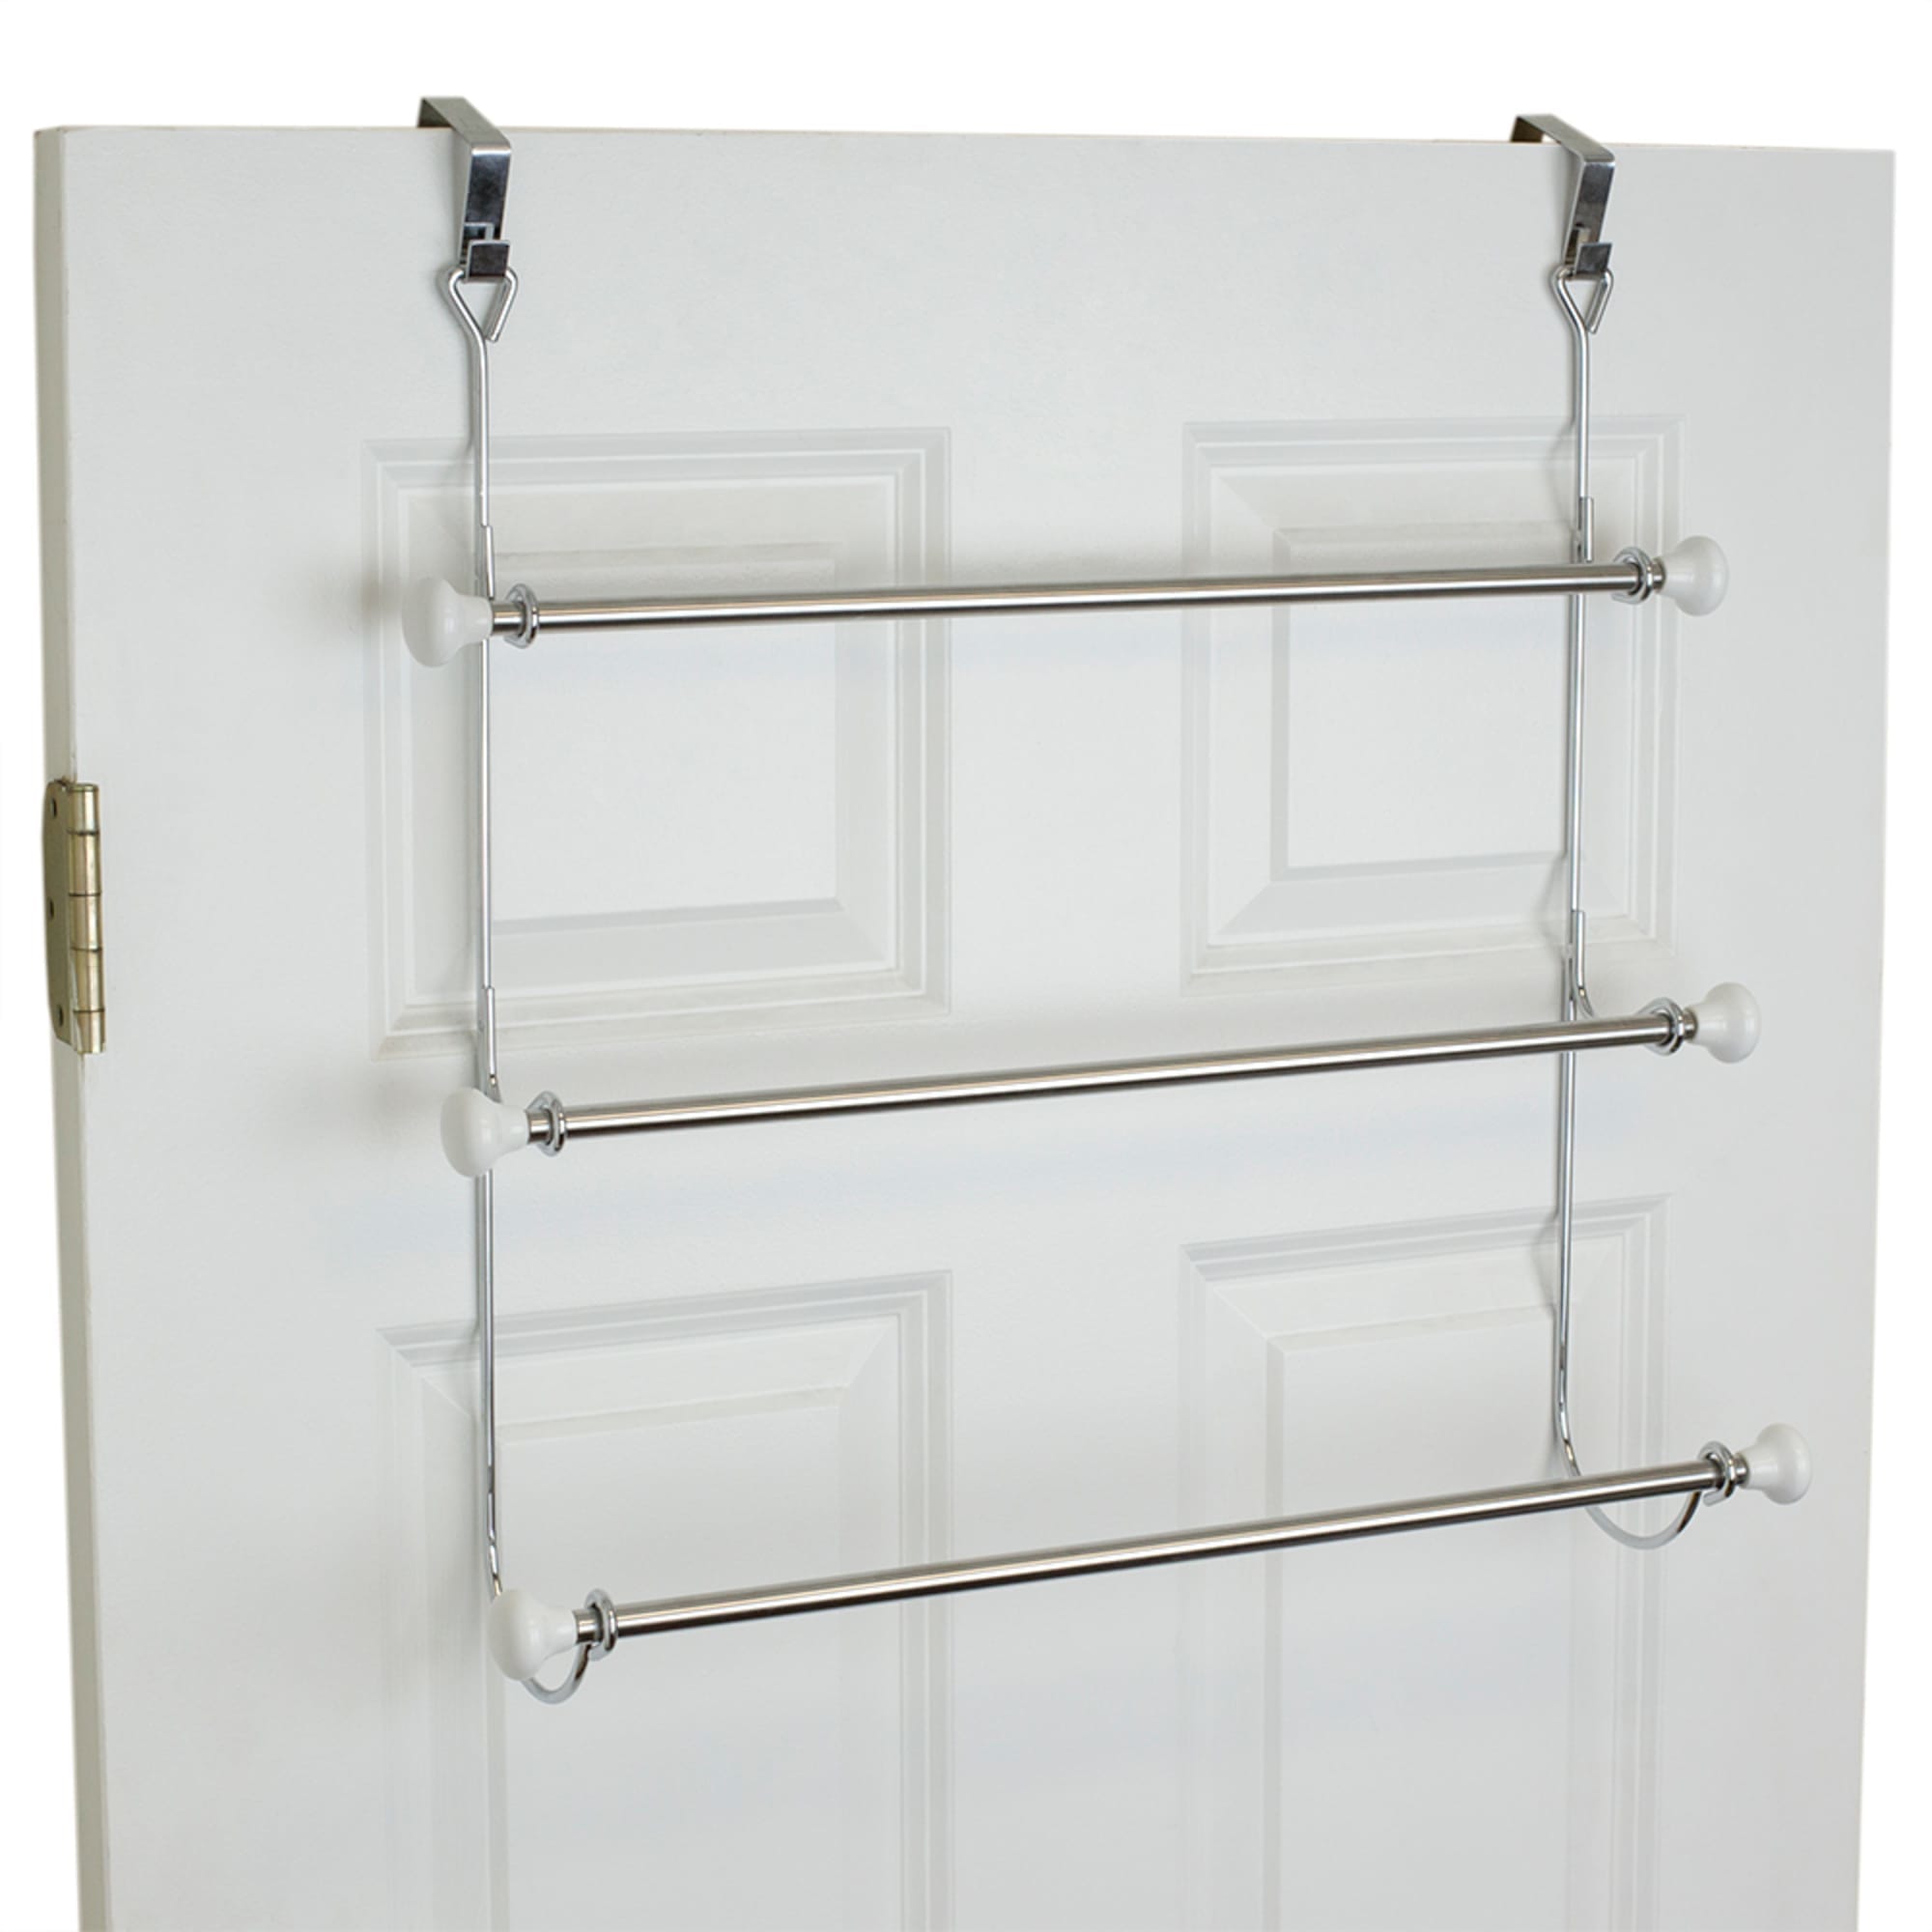 Home Basics 3 Tier Chrome Plated Steel Over the Door Towel Rack with Ceramic Knobs $10 EACH, CASE PACK OF 12